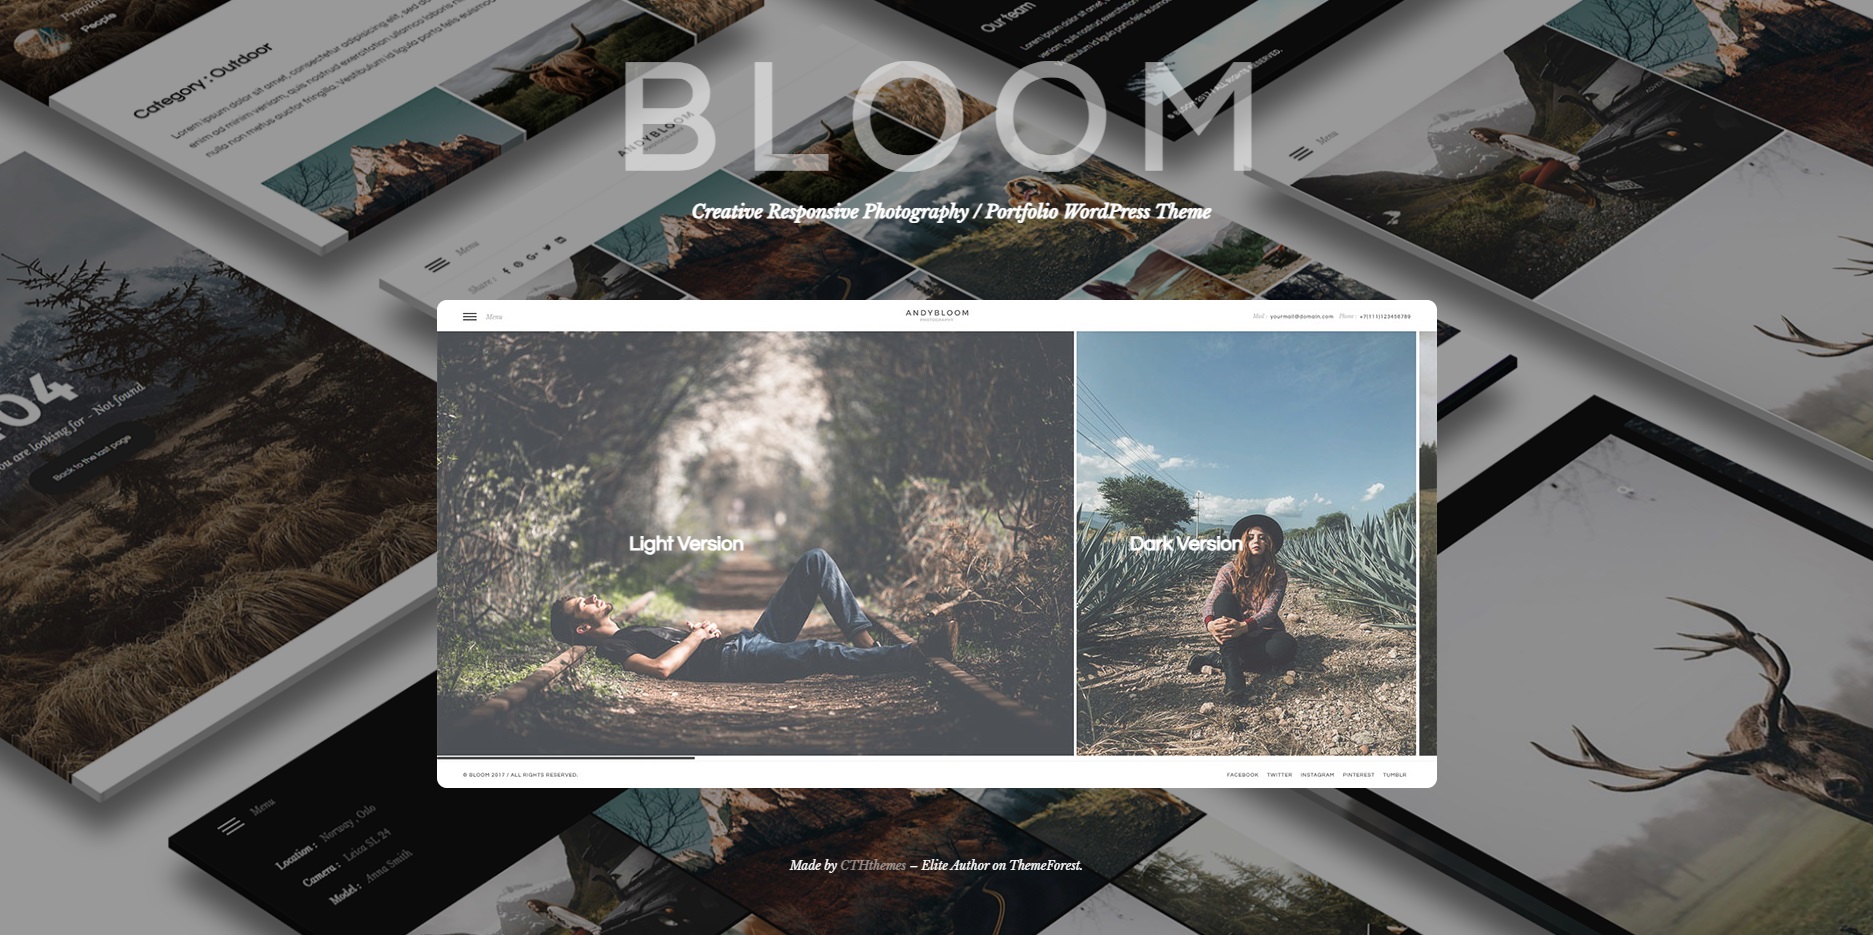 Bloom demo page